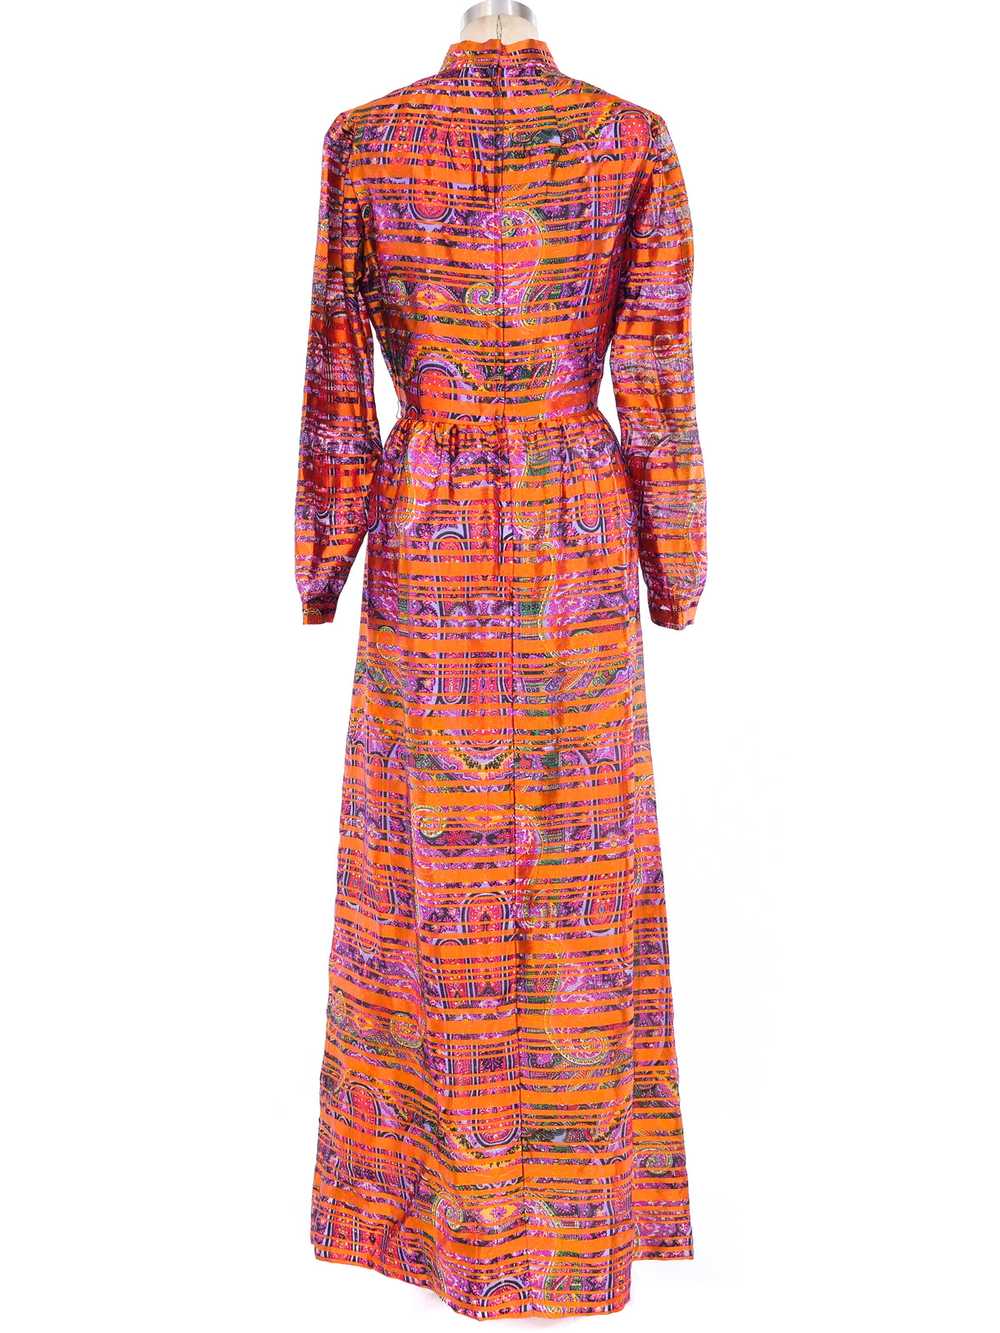 Psychedelic Paisley Printed Striped Dress - image 3